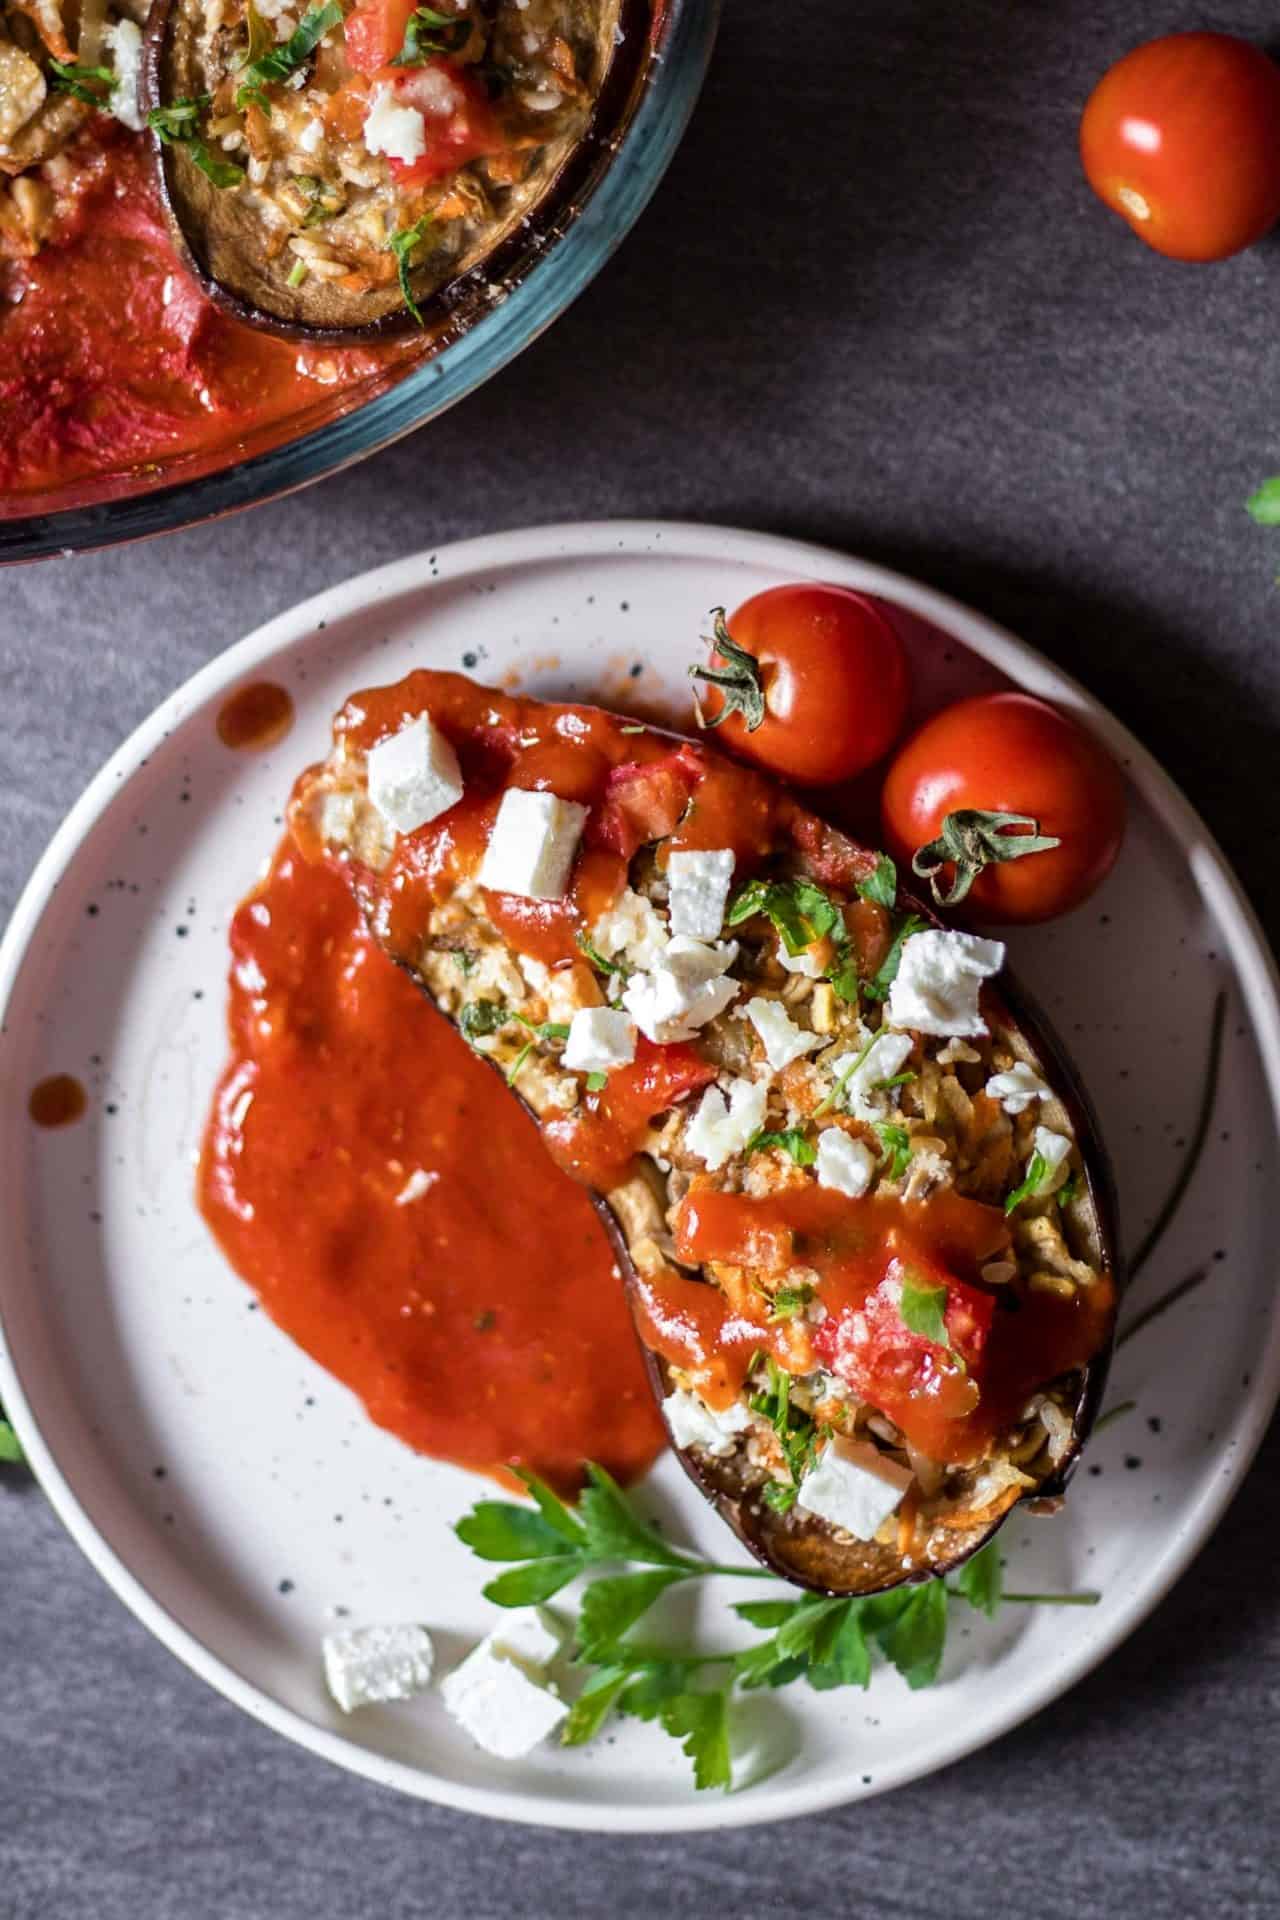 Simple and healthy Low FODMAP Veggie Stuffed Eggplant. Option to make it completely vegan. A flavorful, comforting and super delicious dish.